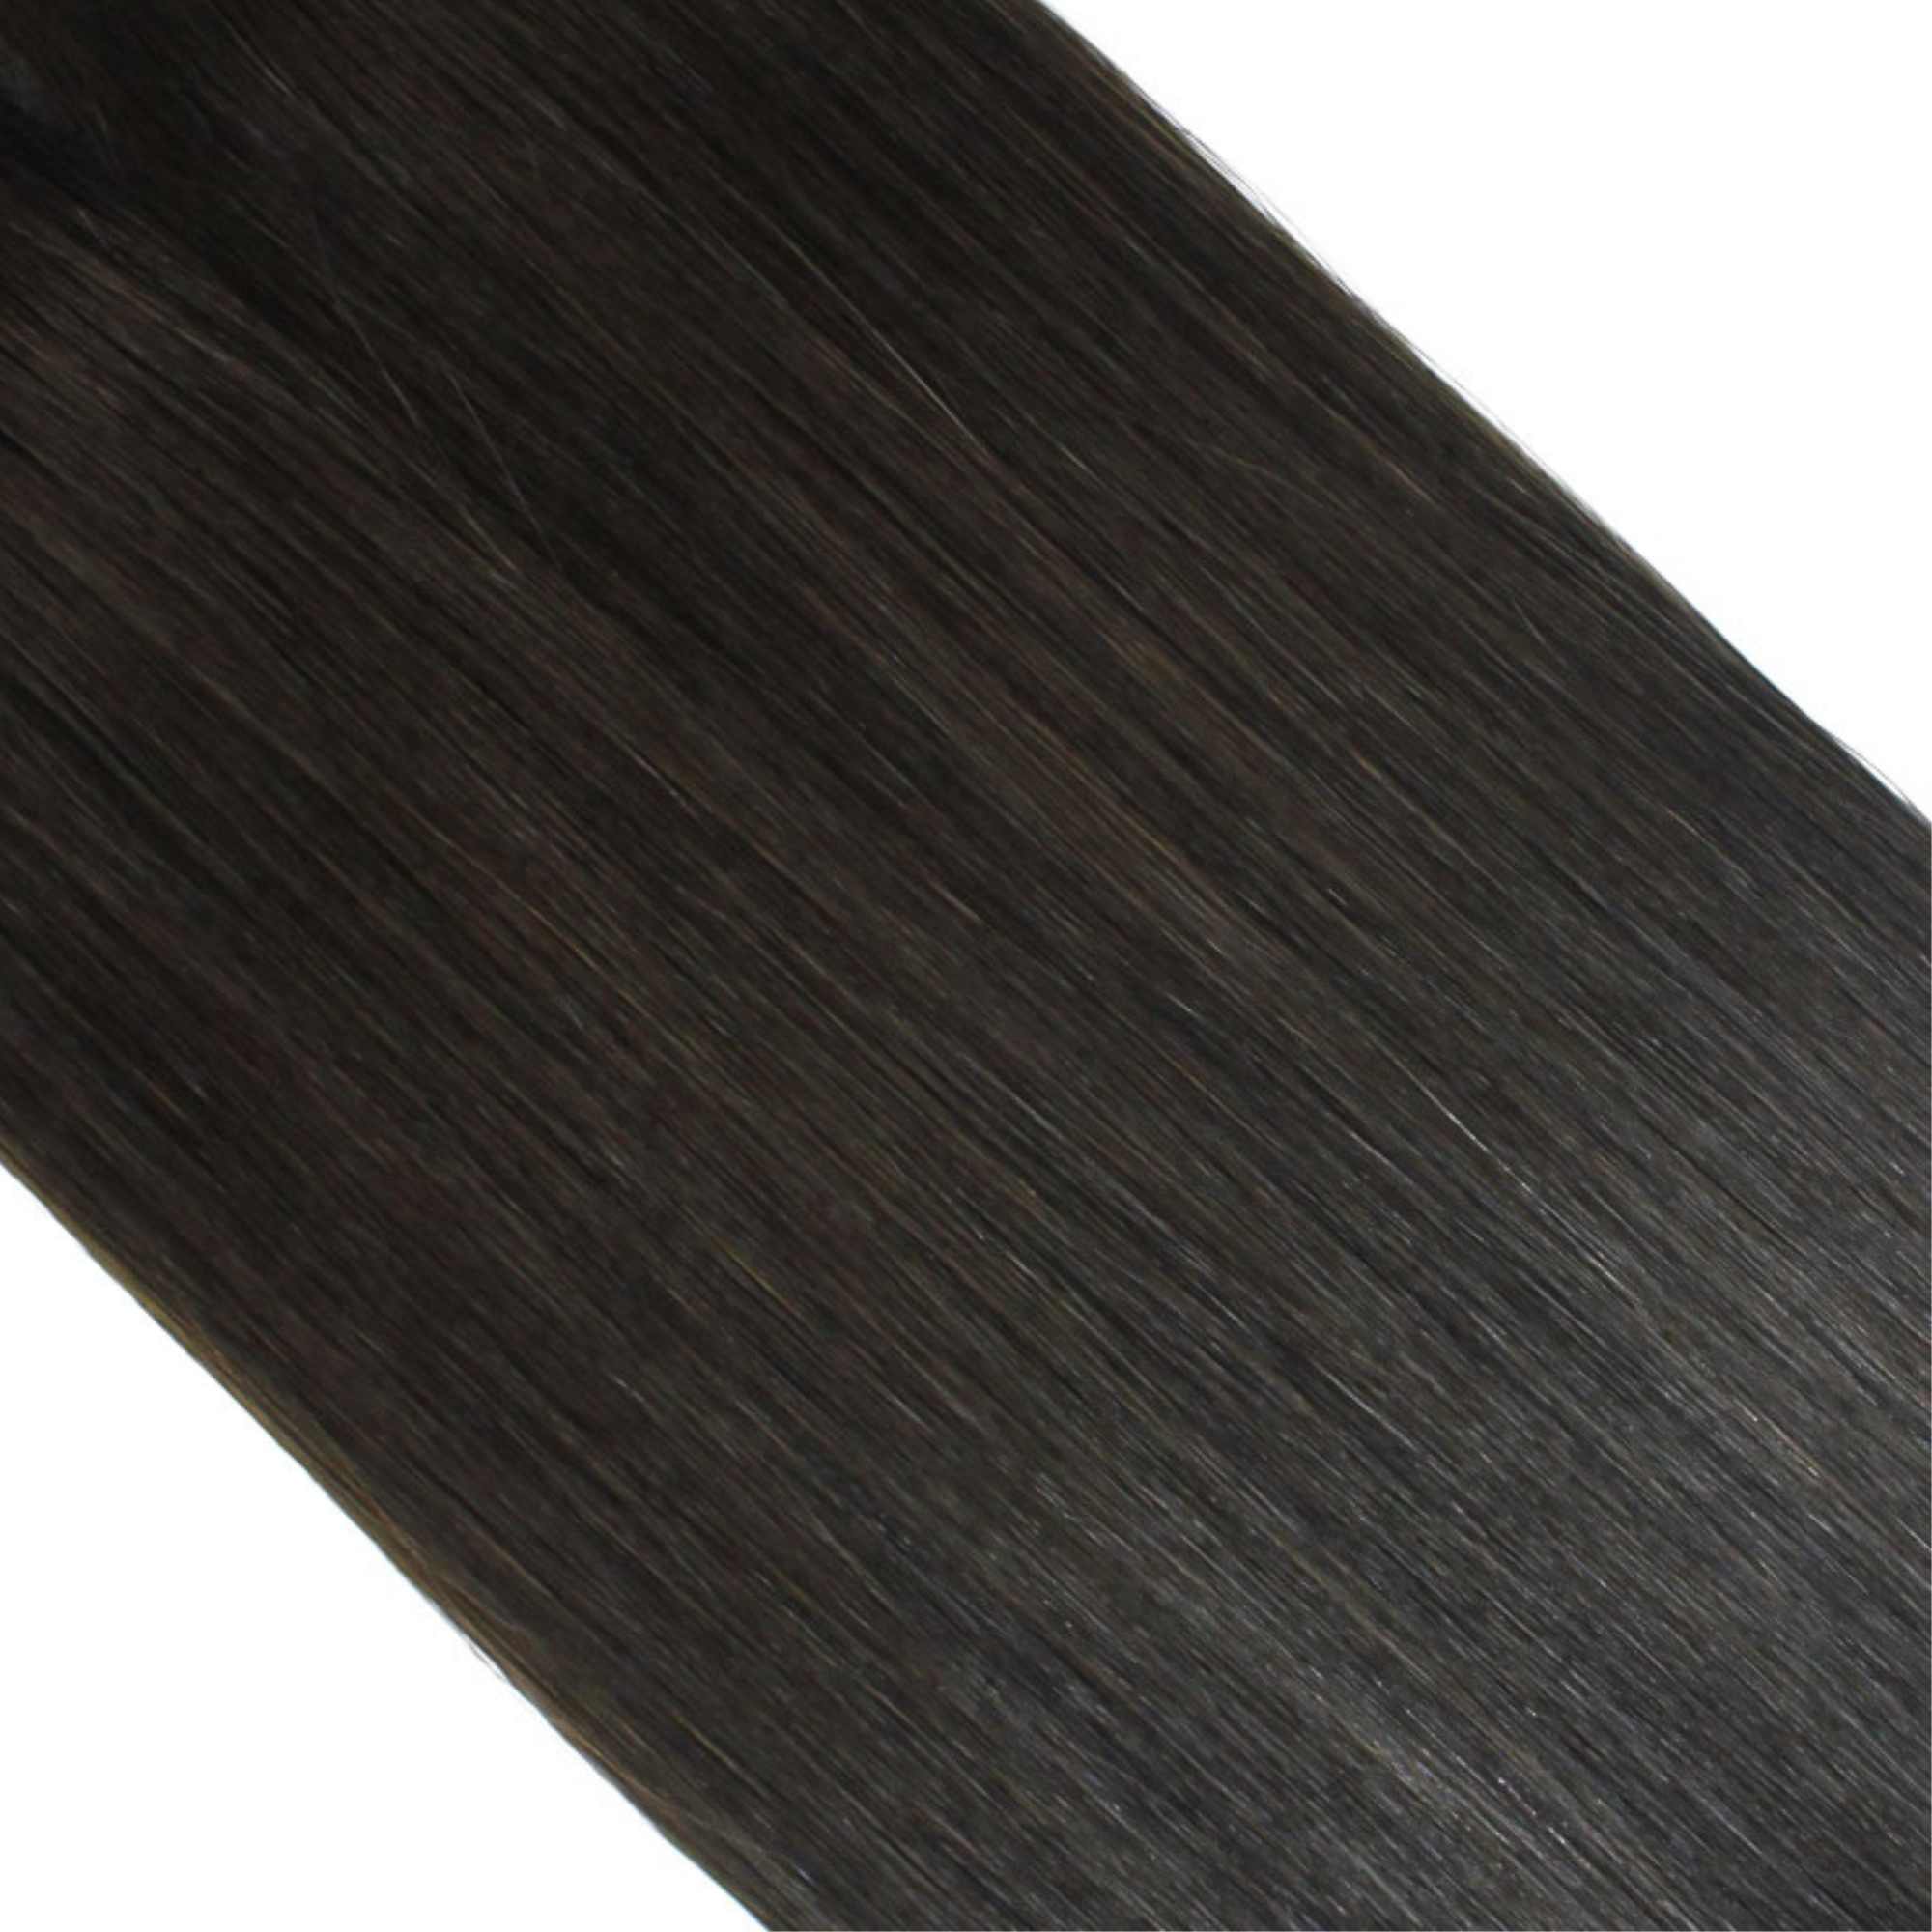 18" Prebonded Extensions Show Stopper